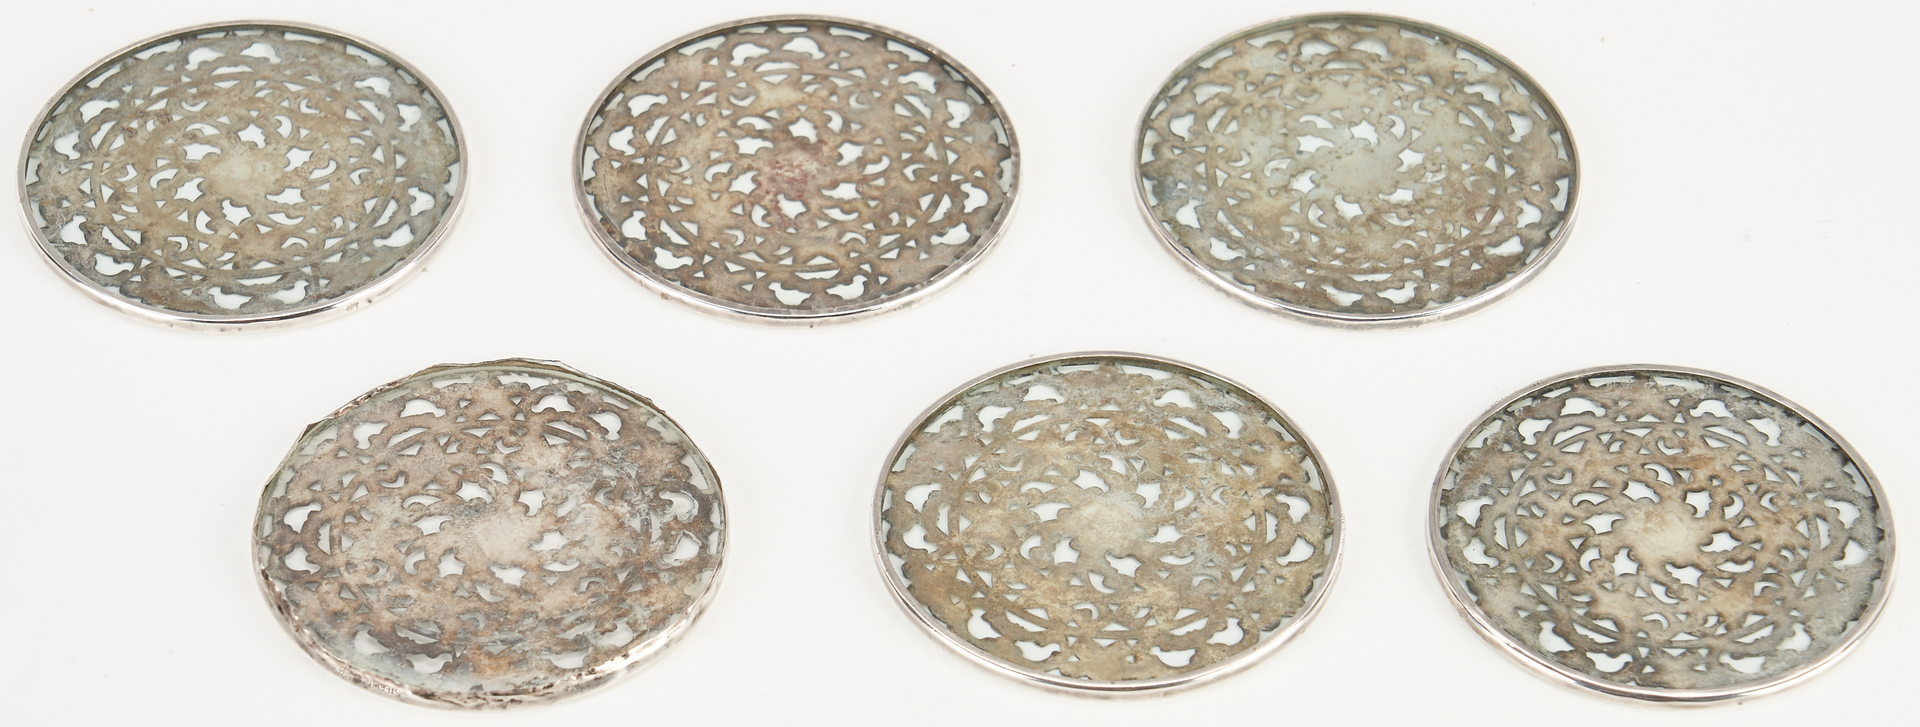 Lot 913: Large Sterling oval large dish, coasters and more, 25 pcs.